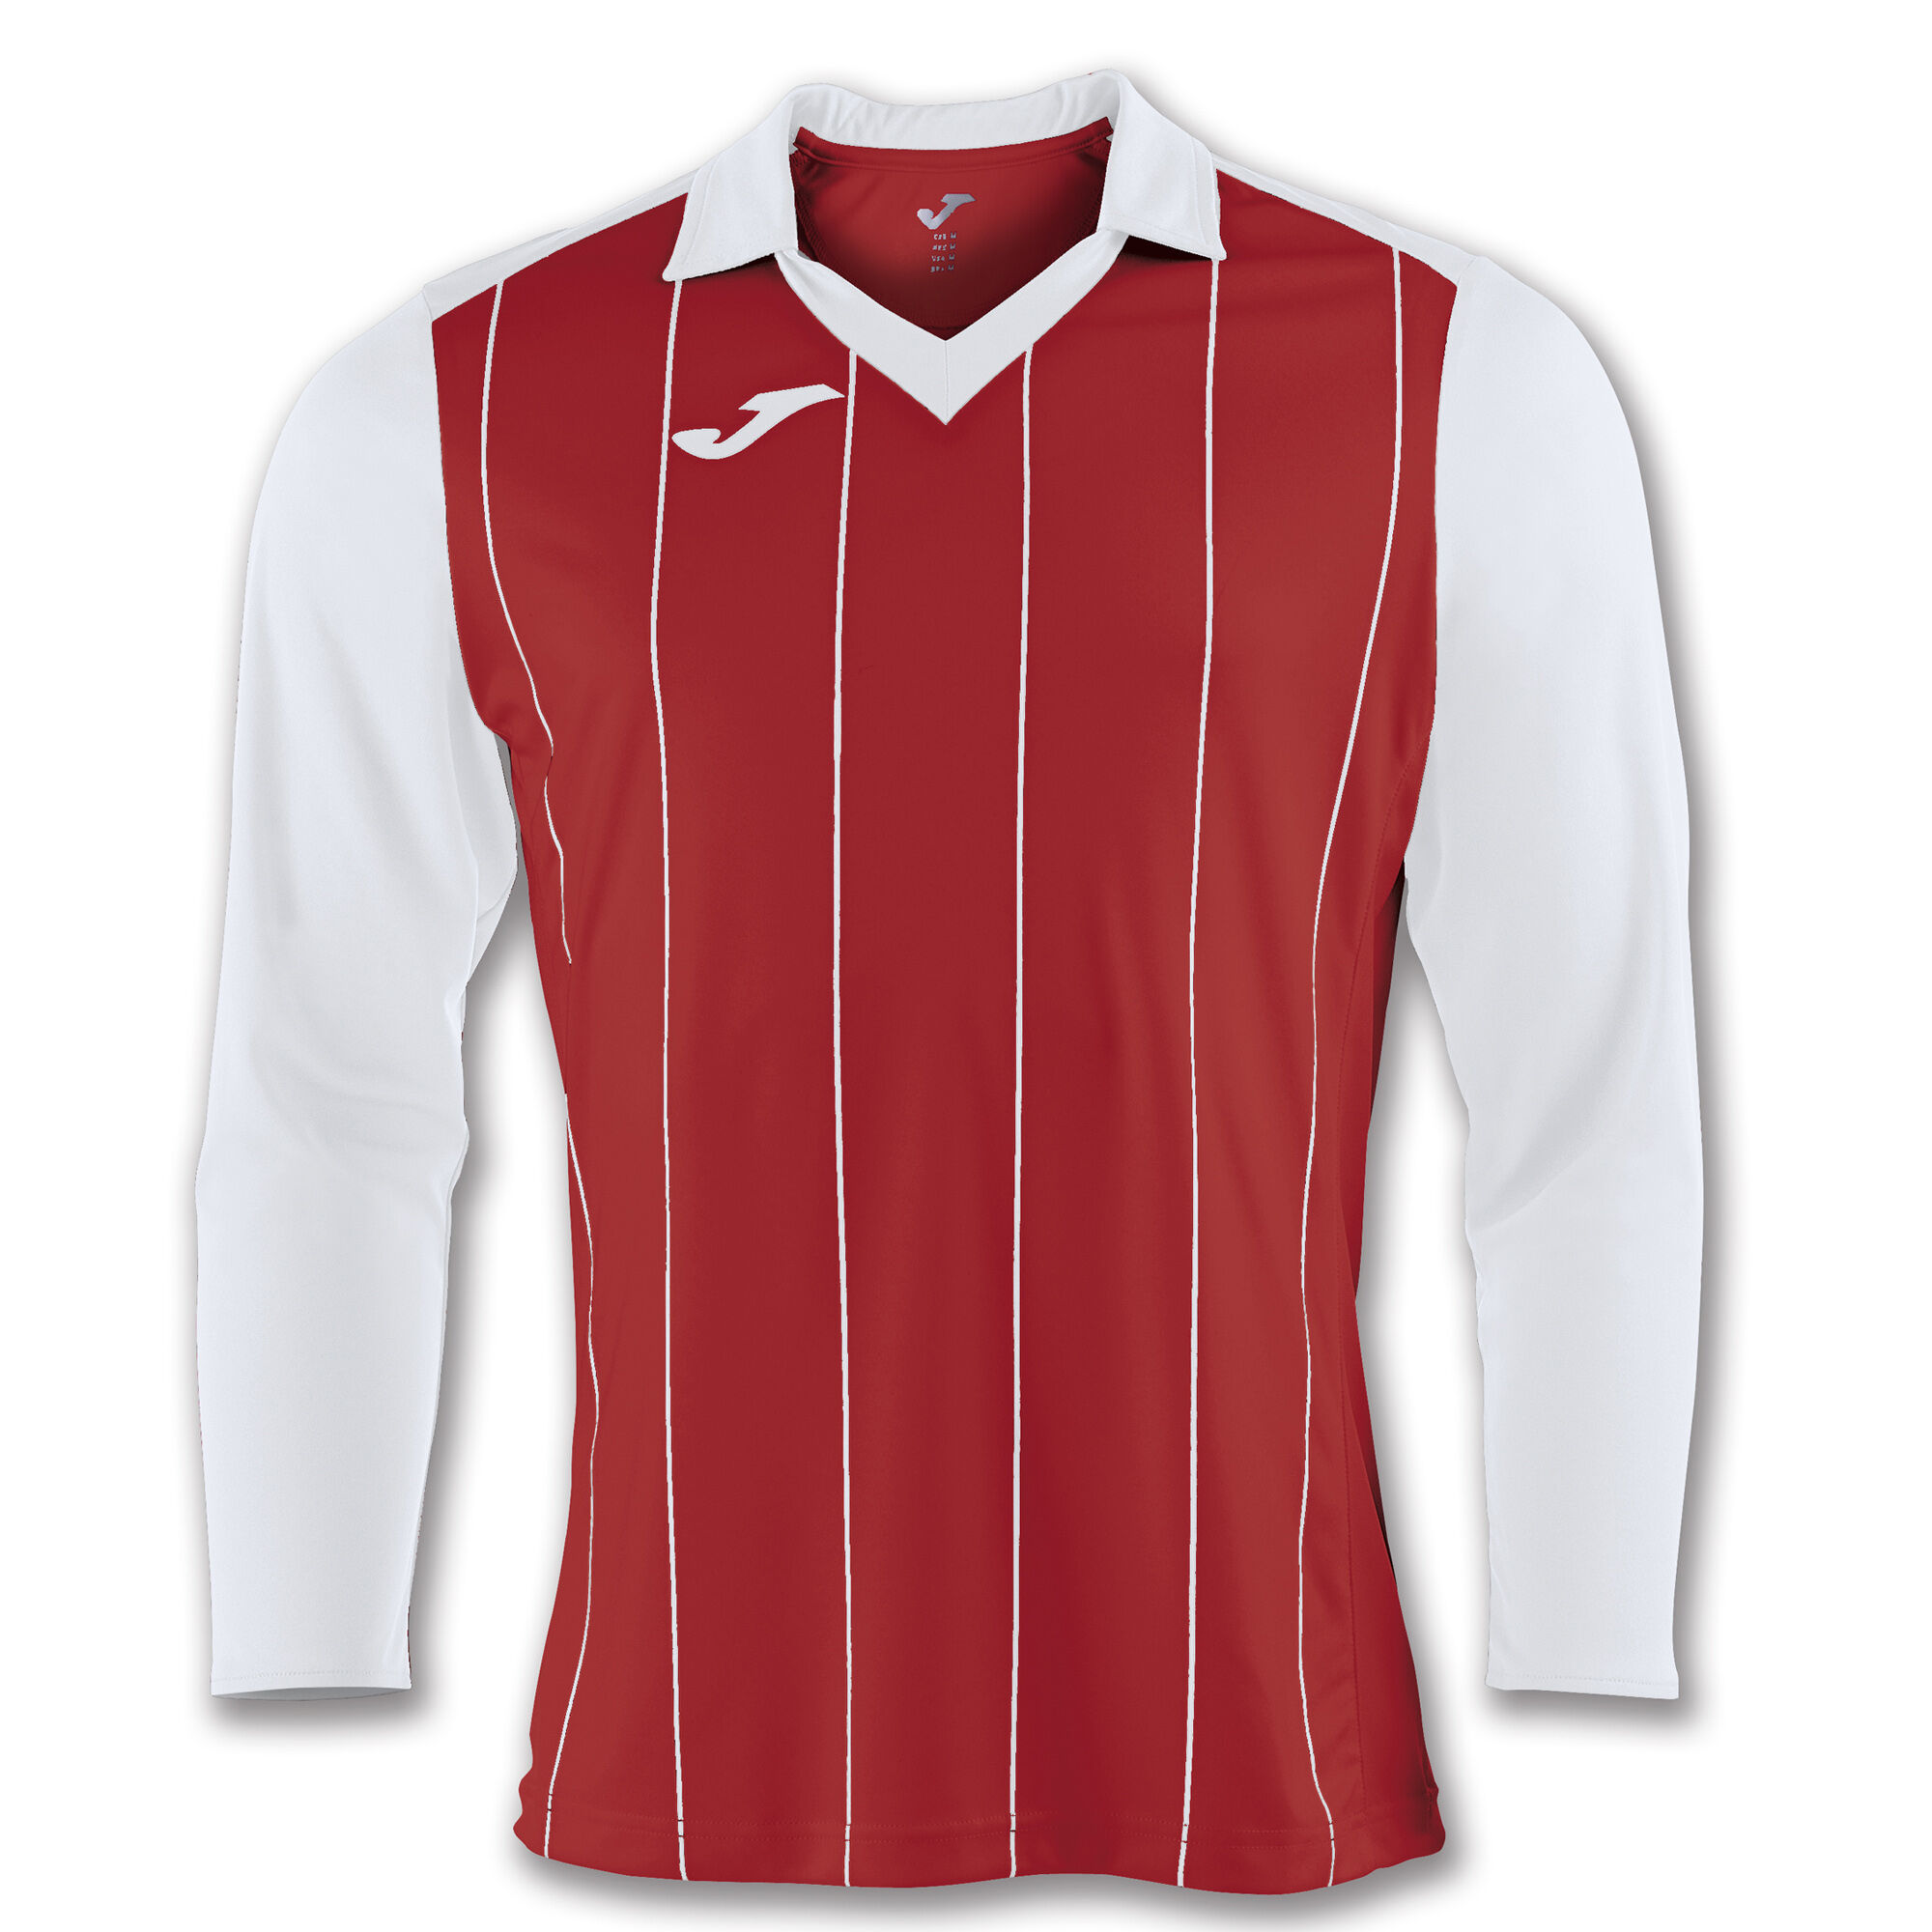 MAILLOT MANCHES LONGUES HOMME GRADA ROUGE BLANC